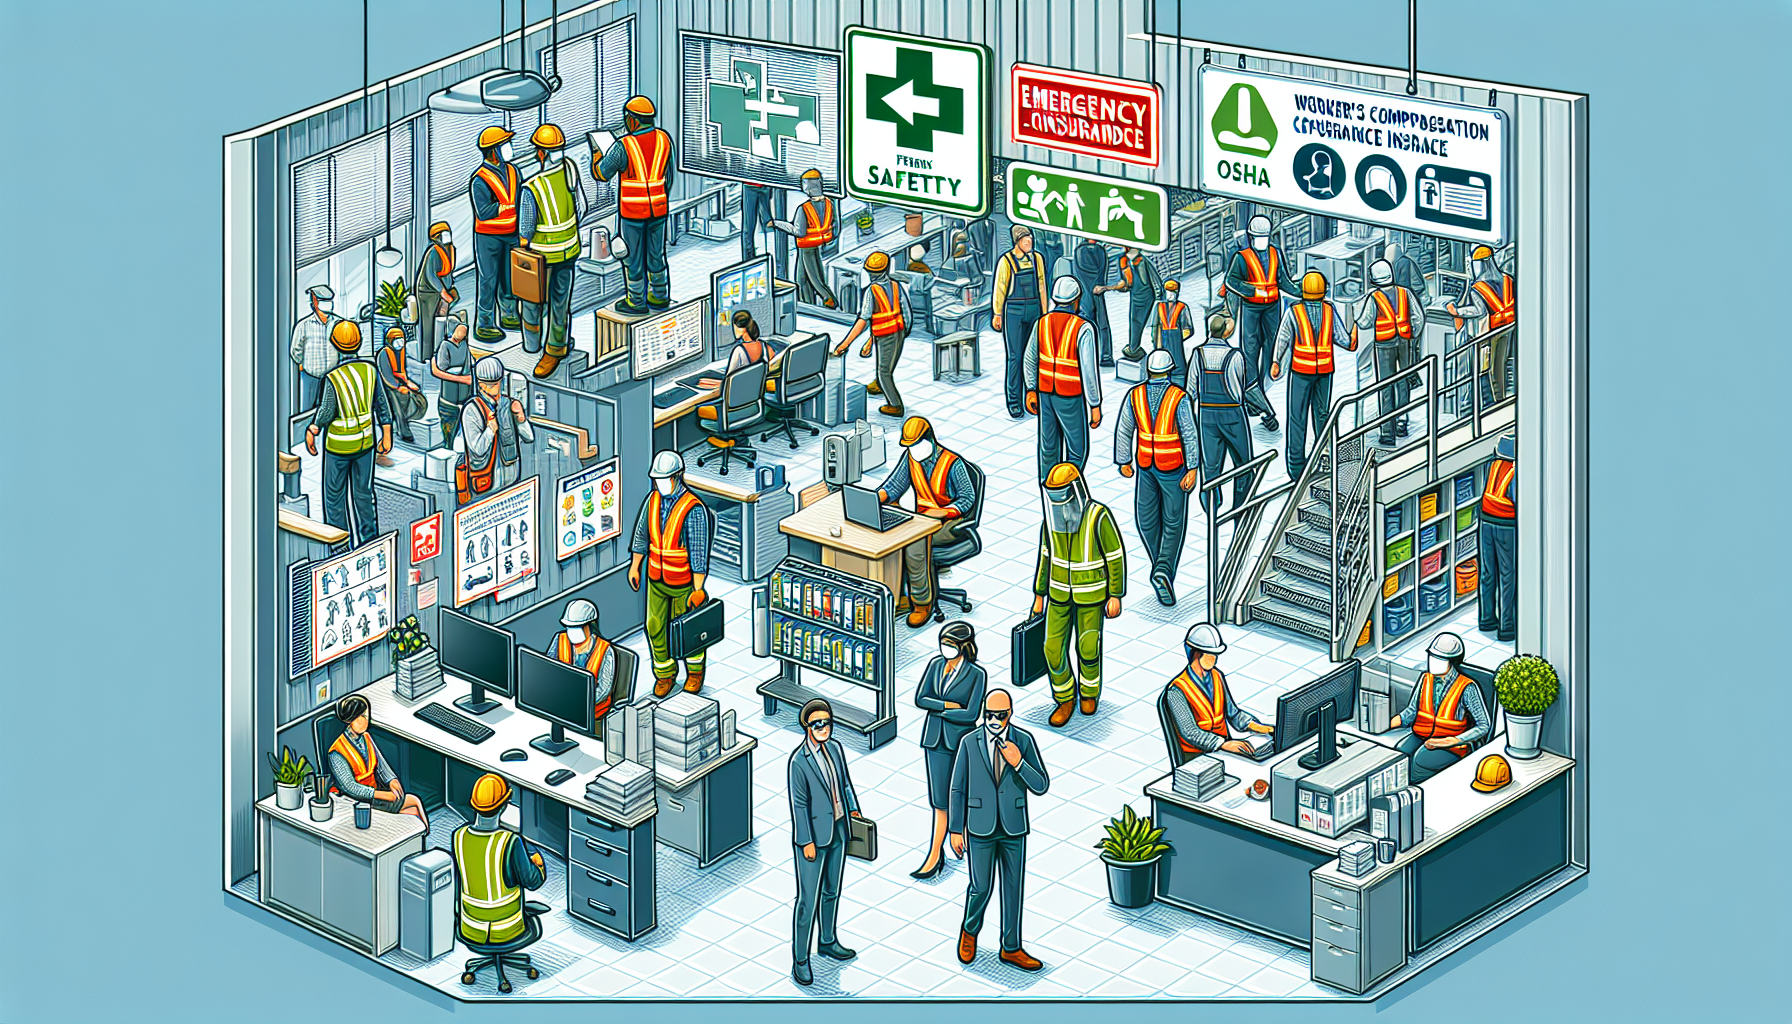 Illustration of workplace safety and compliance